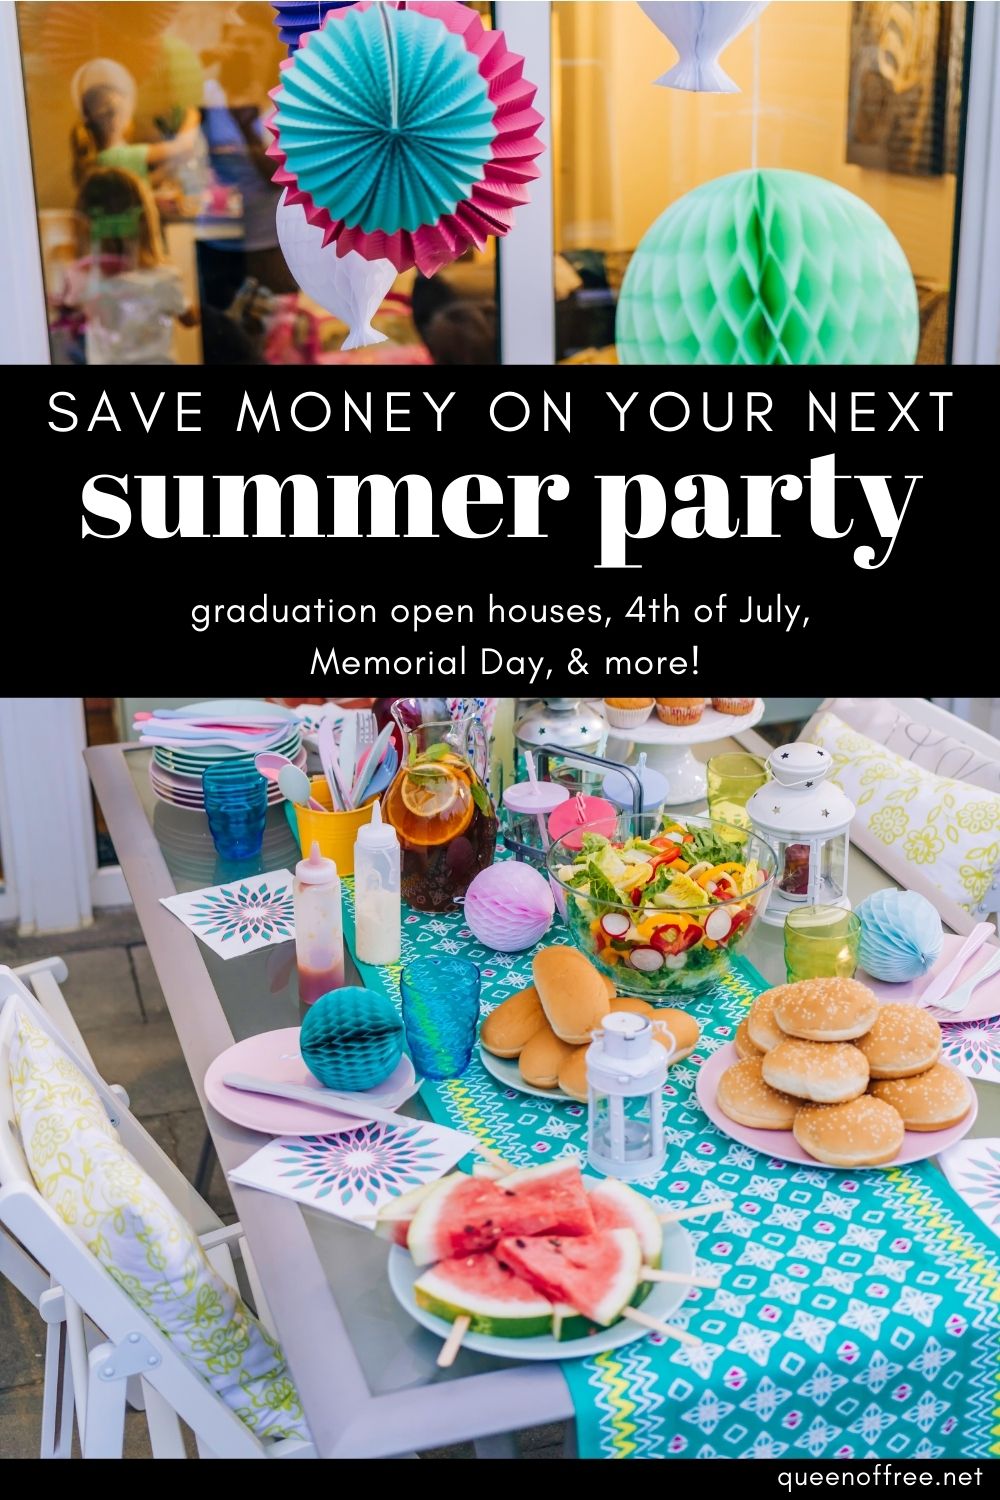 Graduation Open Houses, Memorial Day, Father's Day, 4th of July, and more - save money on summer parties with these tips!